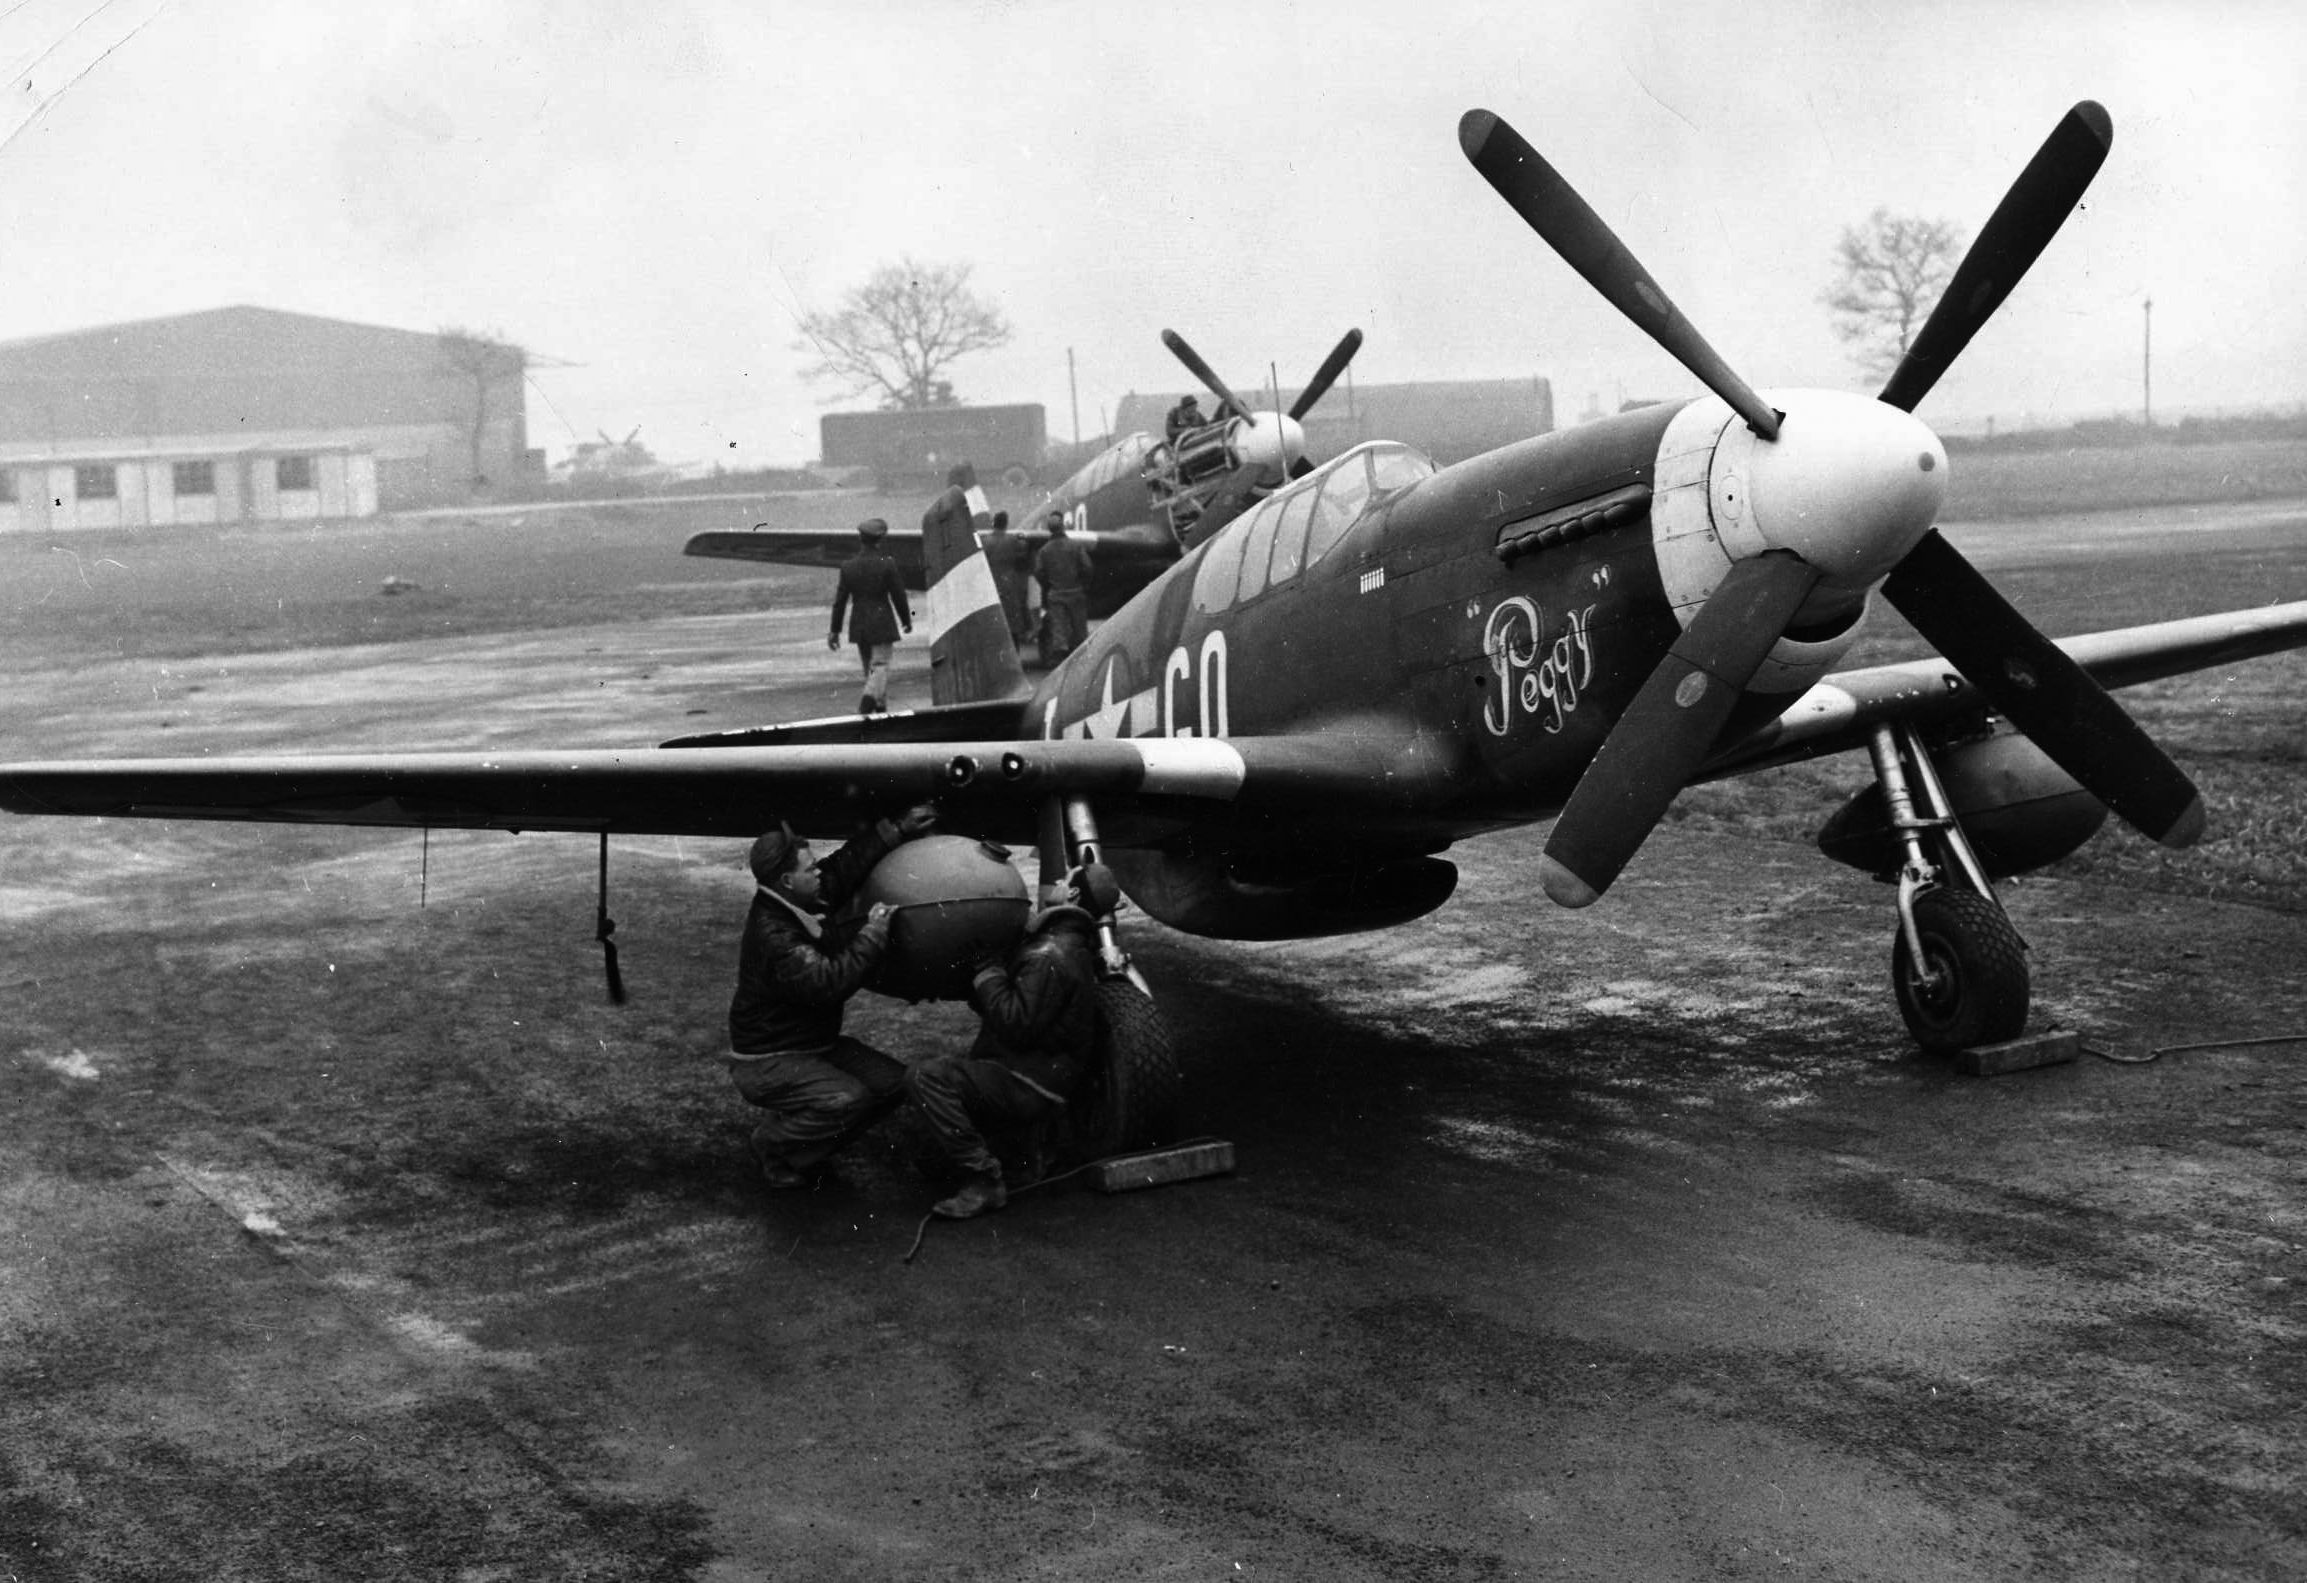 On a muddy airfield in England, P-51 Mustangs sit ready for their pilots to climb aboard as two ground crewmen make a final check of an external drop tank.  The extra range provided by the drop tanks allowed the fighters to escort bomber formations deeper into Germany.